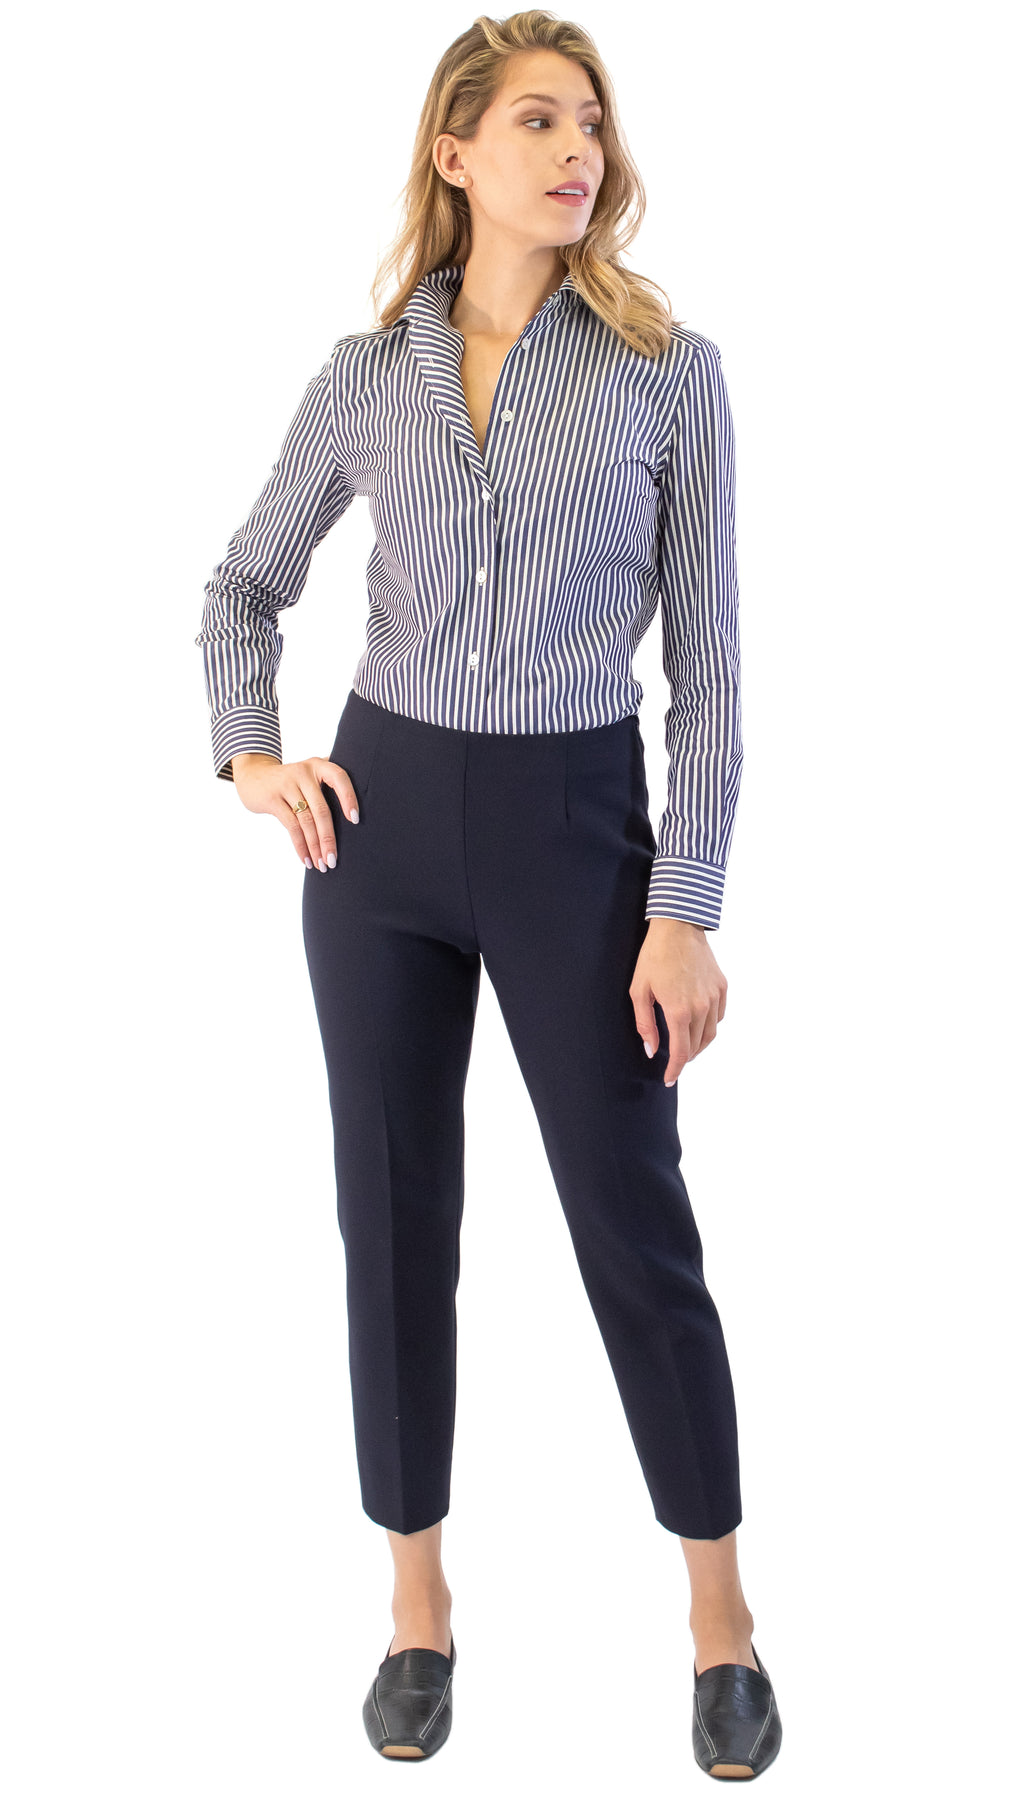 Cigarette trousers - Black/Pinstriped - Ladies | H&M IN